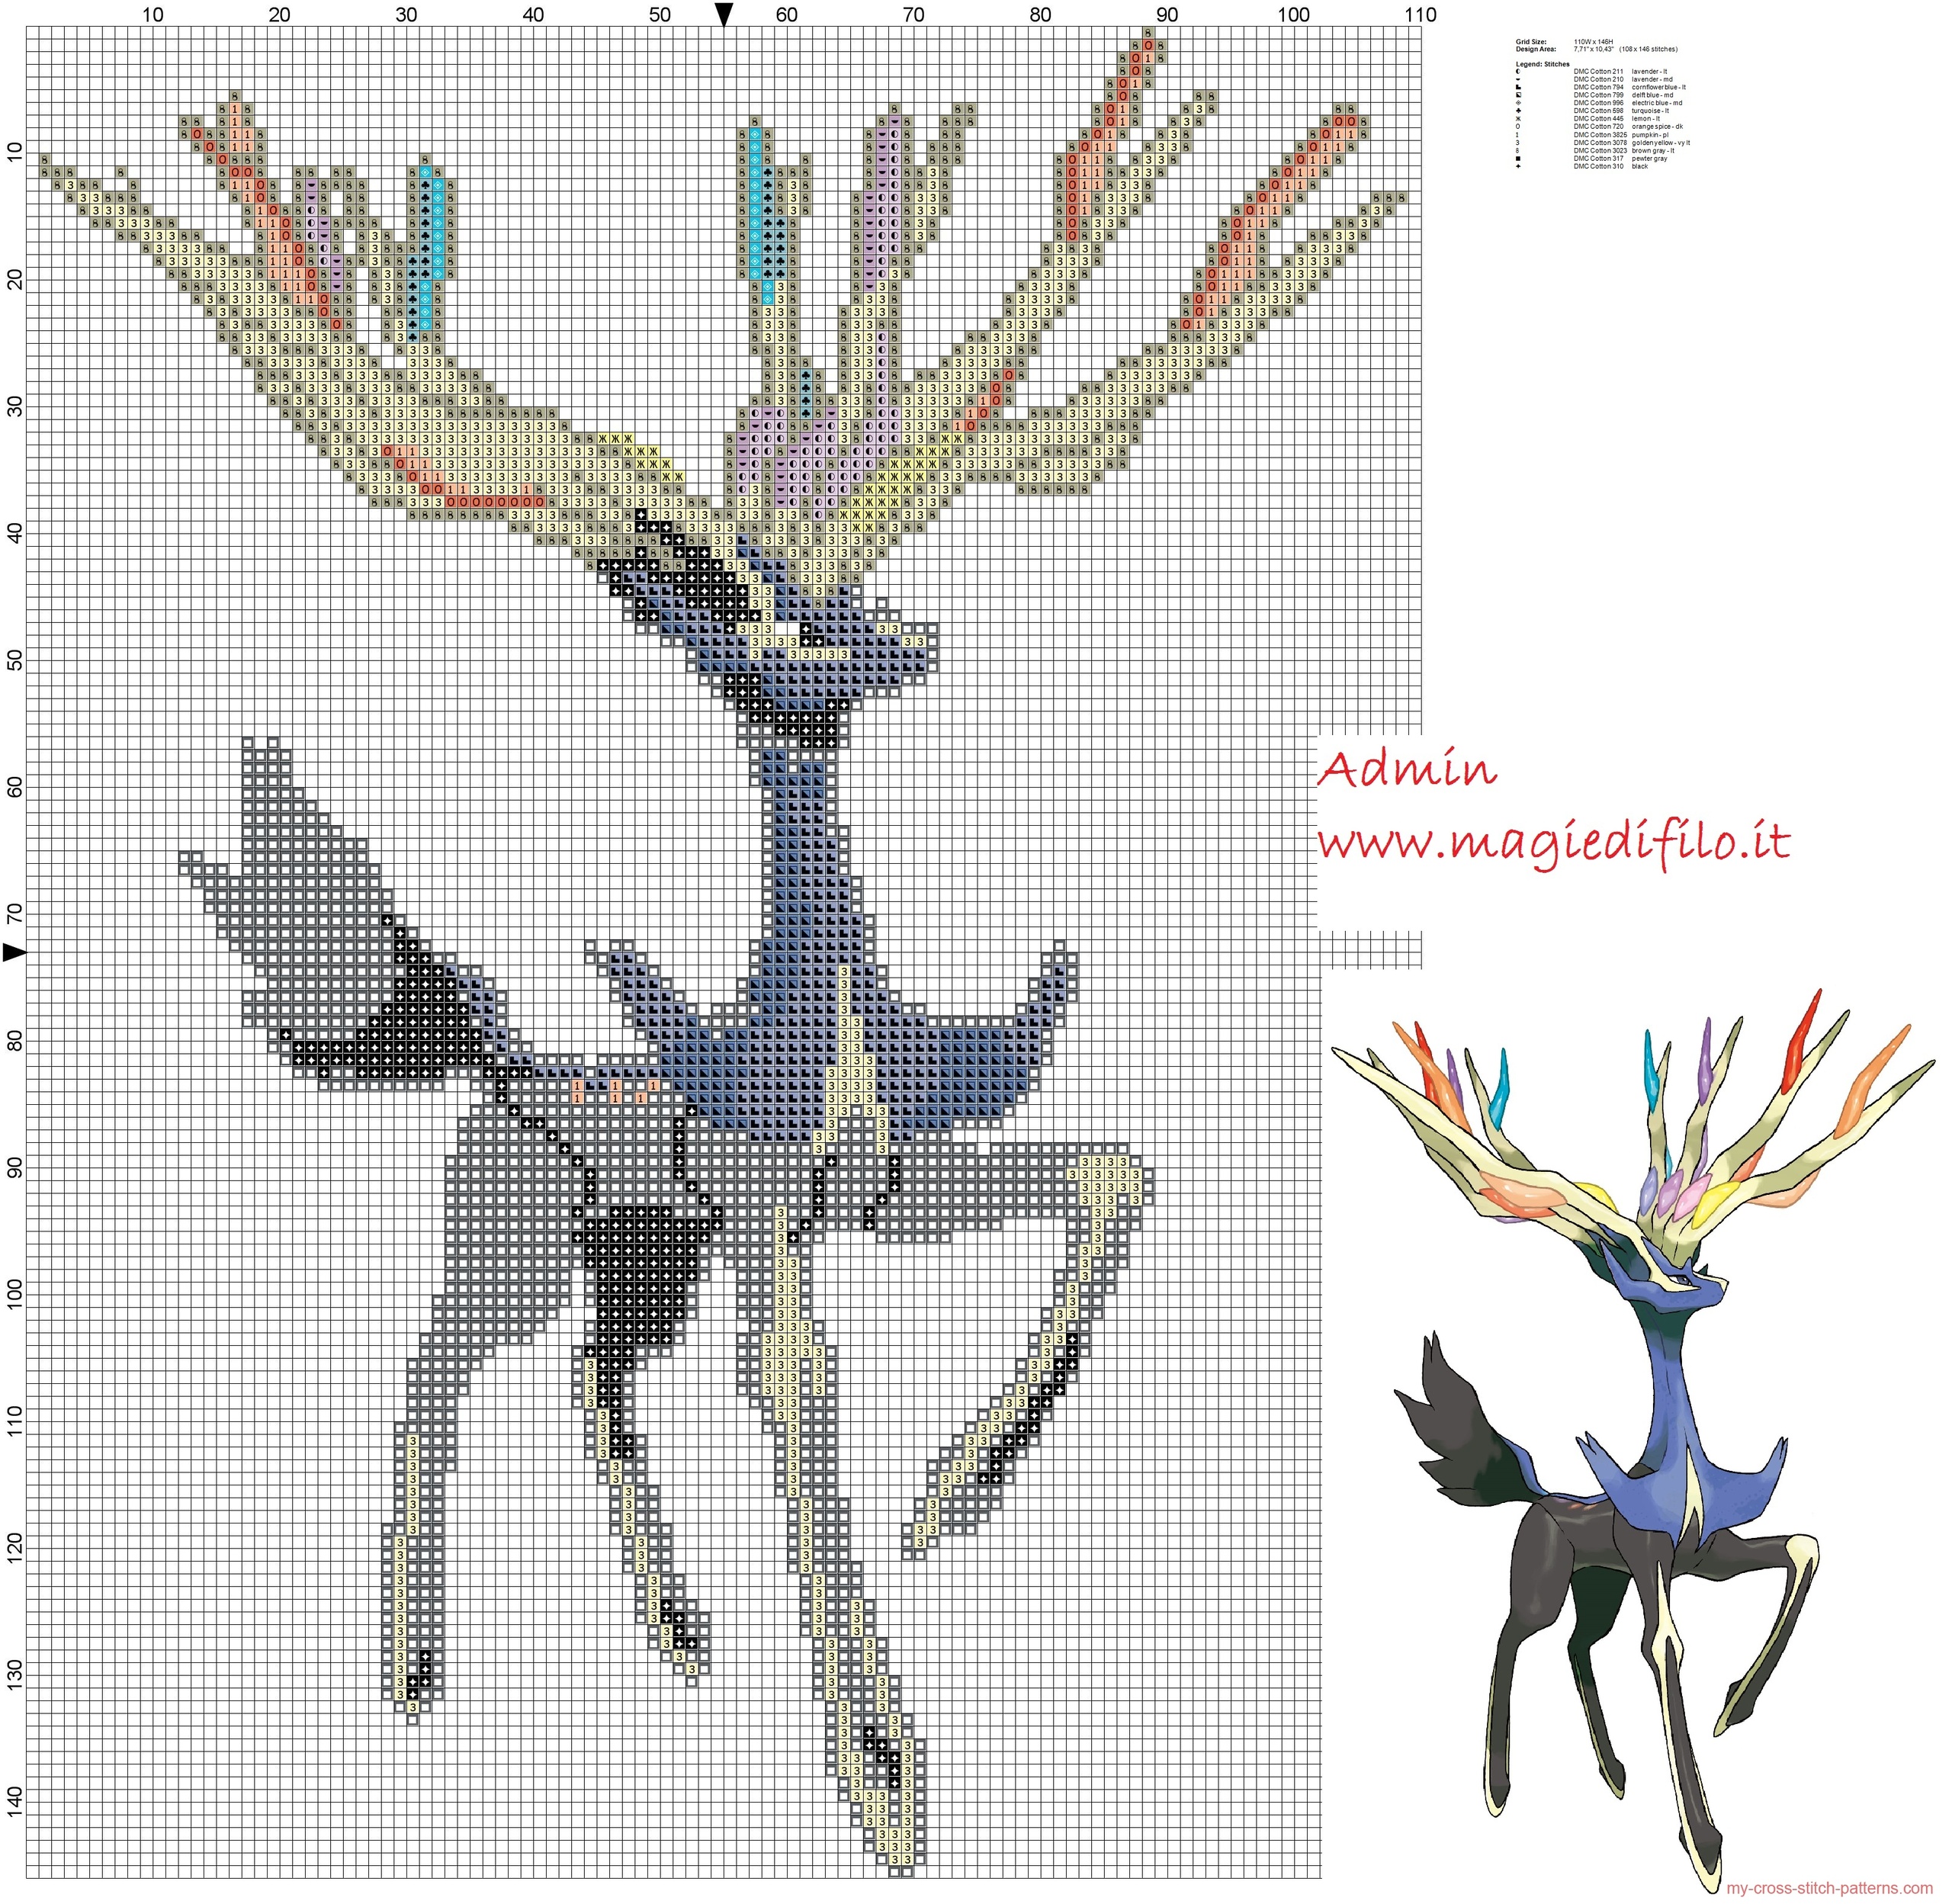 xerneas_pokemon_716_sixth_generation_x_and_y